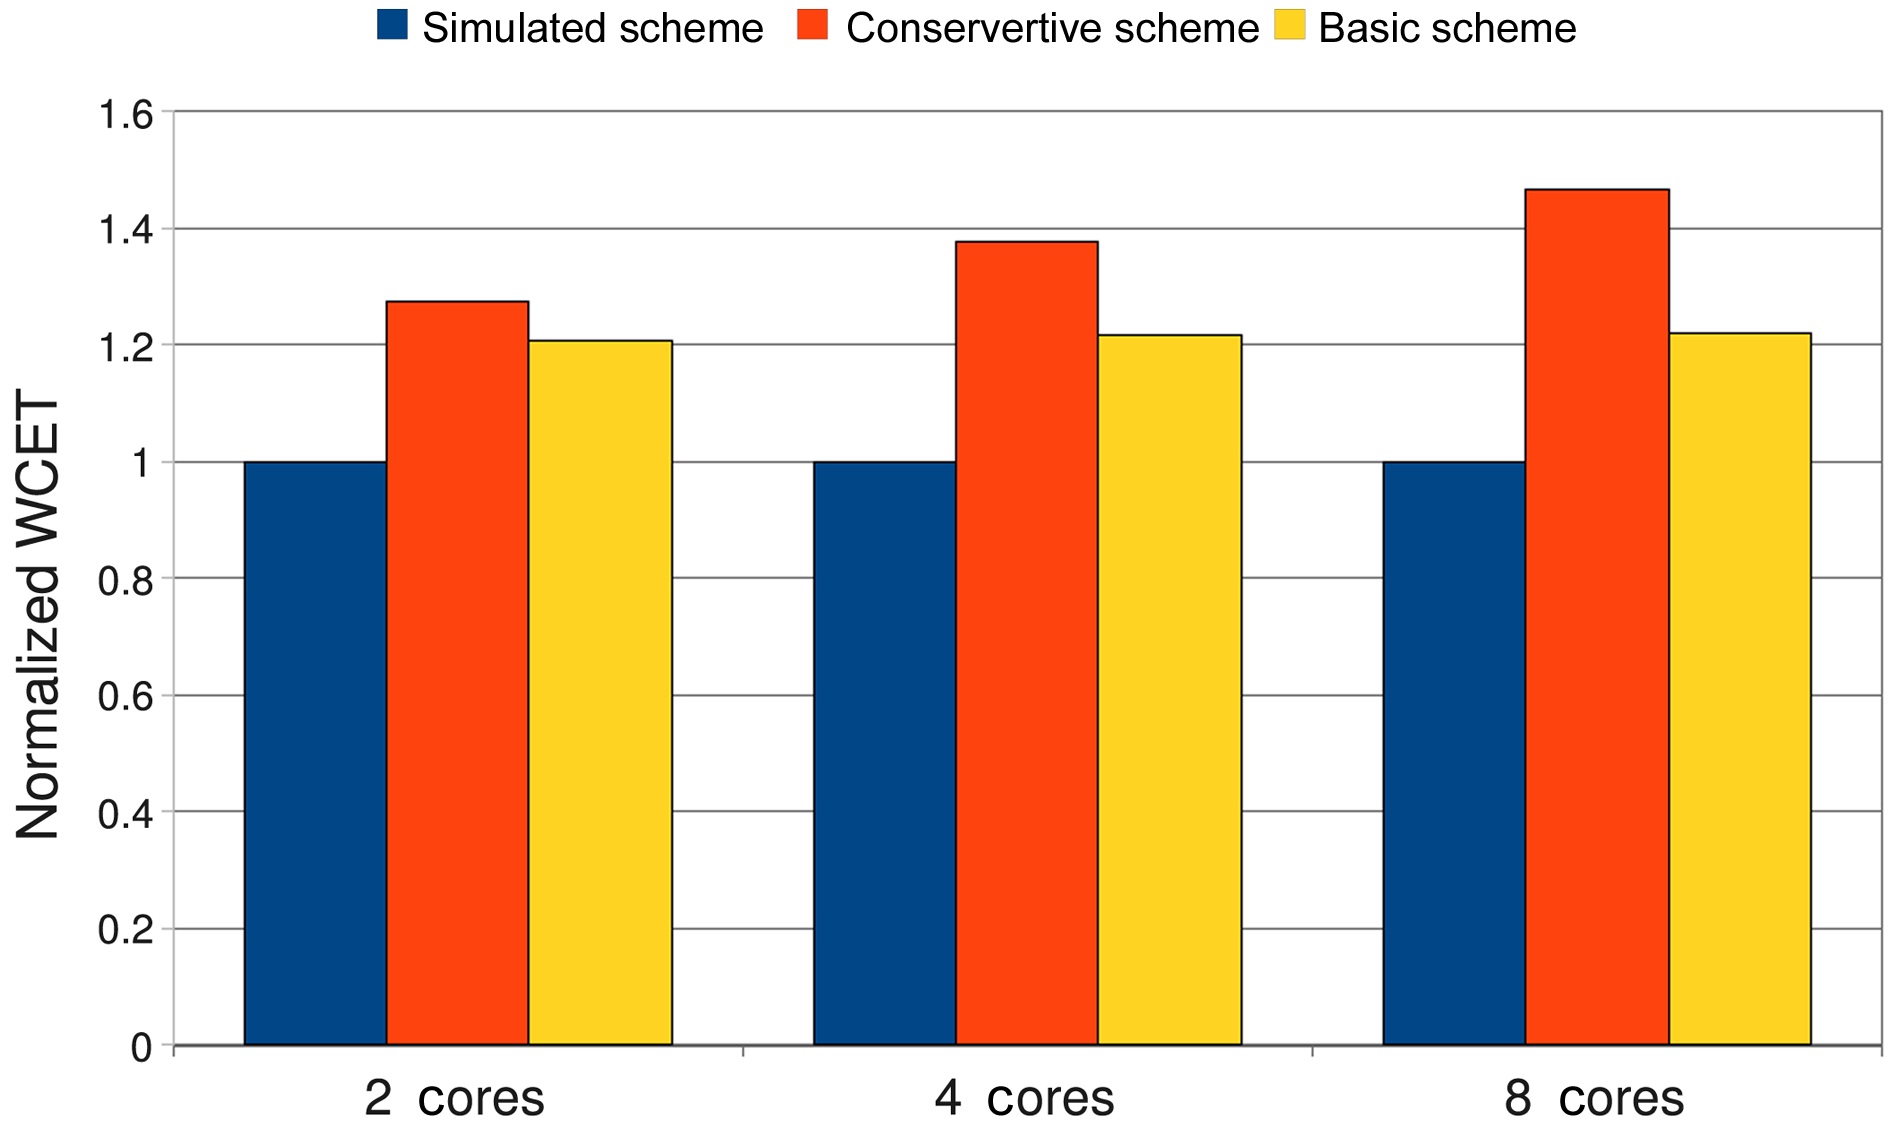 The comparison of the averaged worst-case execution times (WCETs) of the conservative scheme and the basic scheme normalized with those of the simulated scheme in case of 2 cores, 4 cores, and 8 cores.